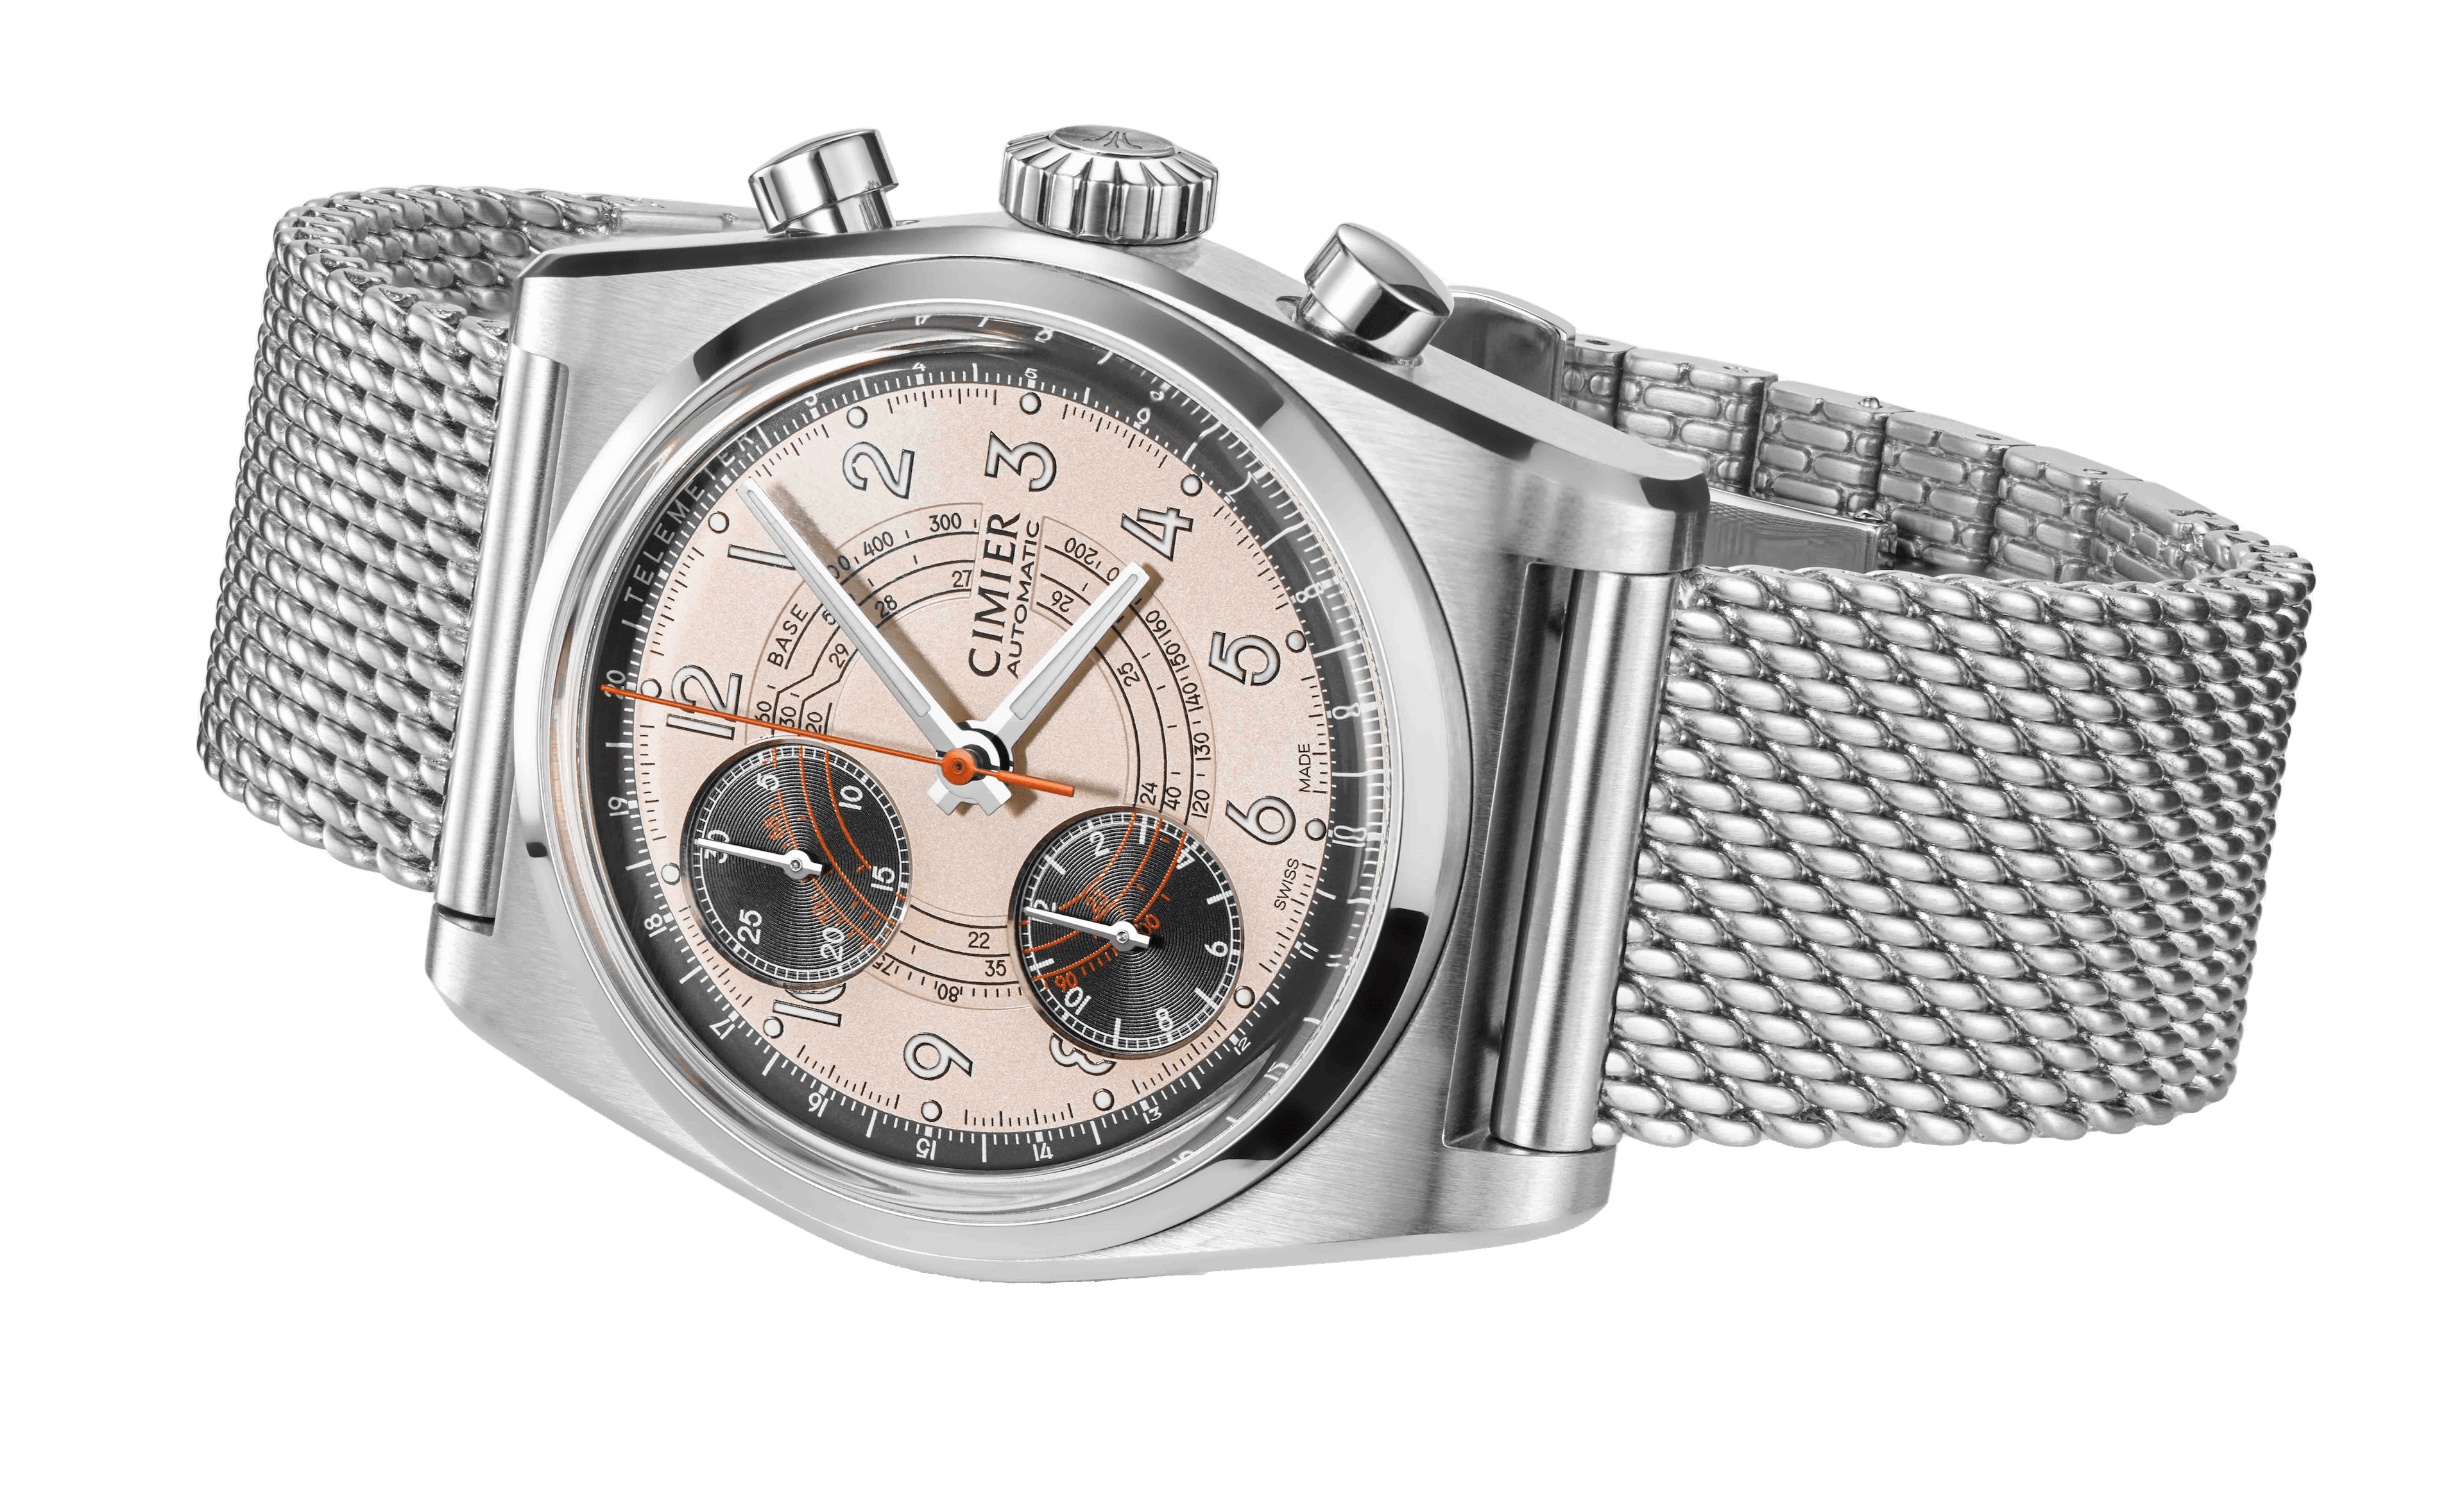 Side view of Cimier 711 Heritage Chronograph wristwatch with white dial